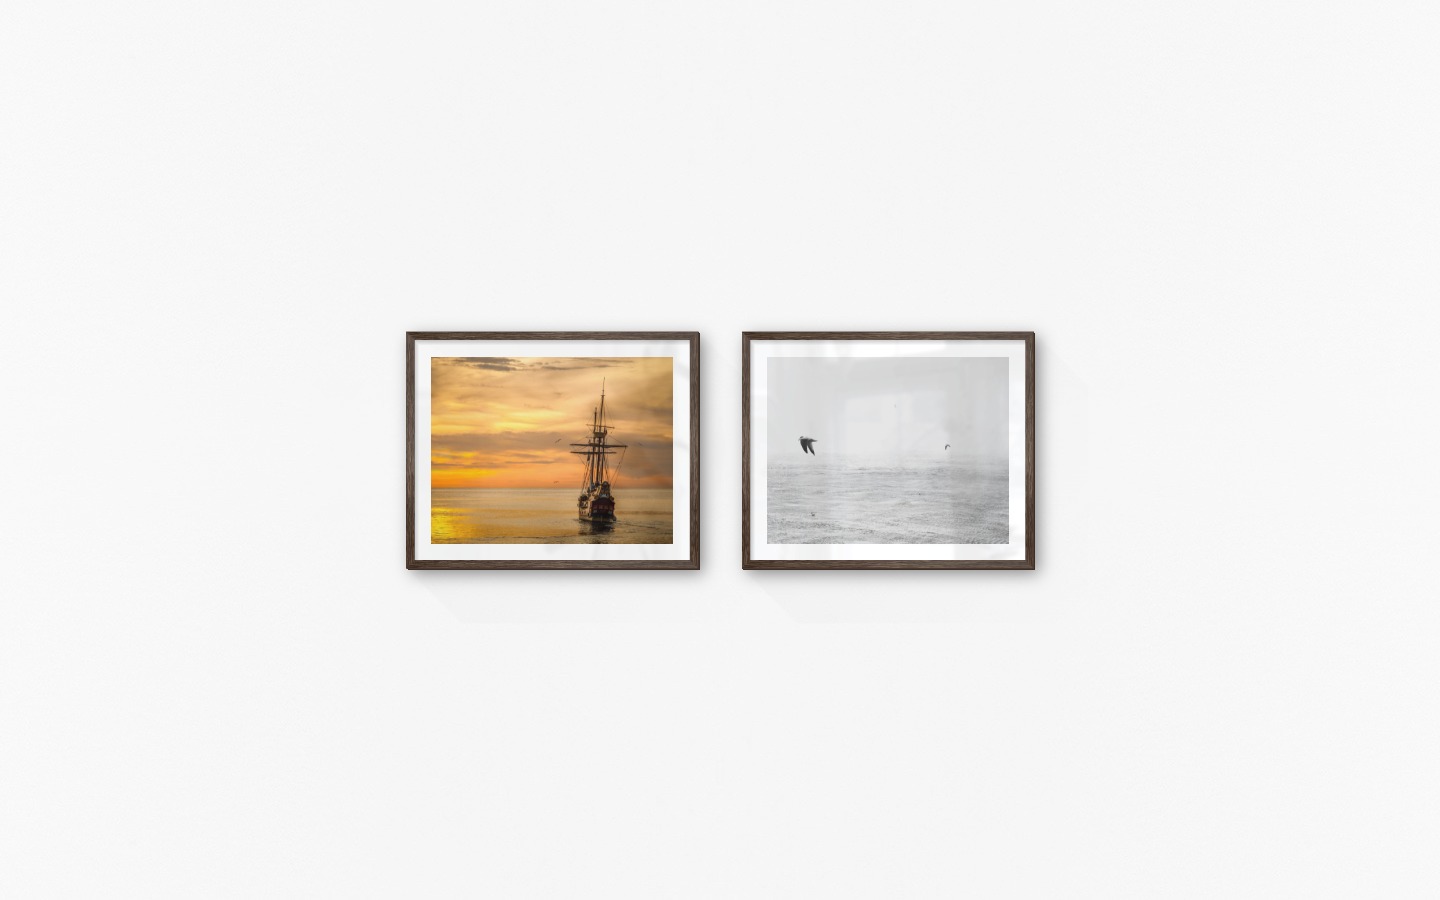 Gallery wall with picture frames in dark wood in sizes 40x50 with prints "Ships at sea" and "Birds over the sea"